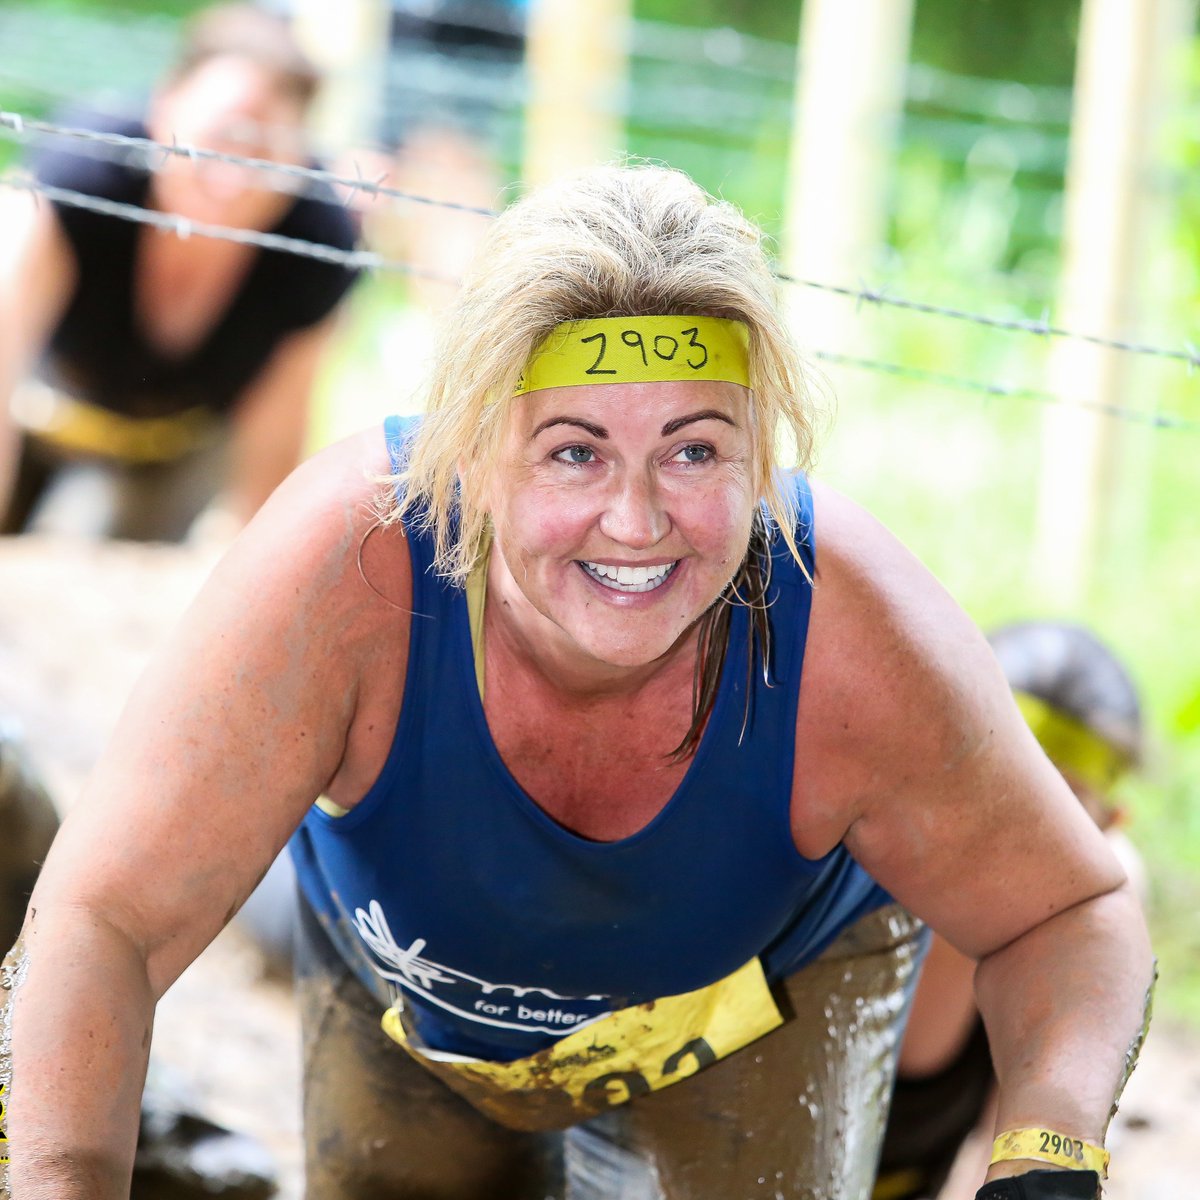 Are you ready to embrace the mud? Join #TeamLeedsMind on Sat June 22nd & Sun June 23rd at @BramhamPark for Total Warrior, the muddiest event in Leeds! Visit our website pick your challenge: a 12K, 6K, or Junior race and secure your spot now! Visit: lght.ly/f72jdha